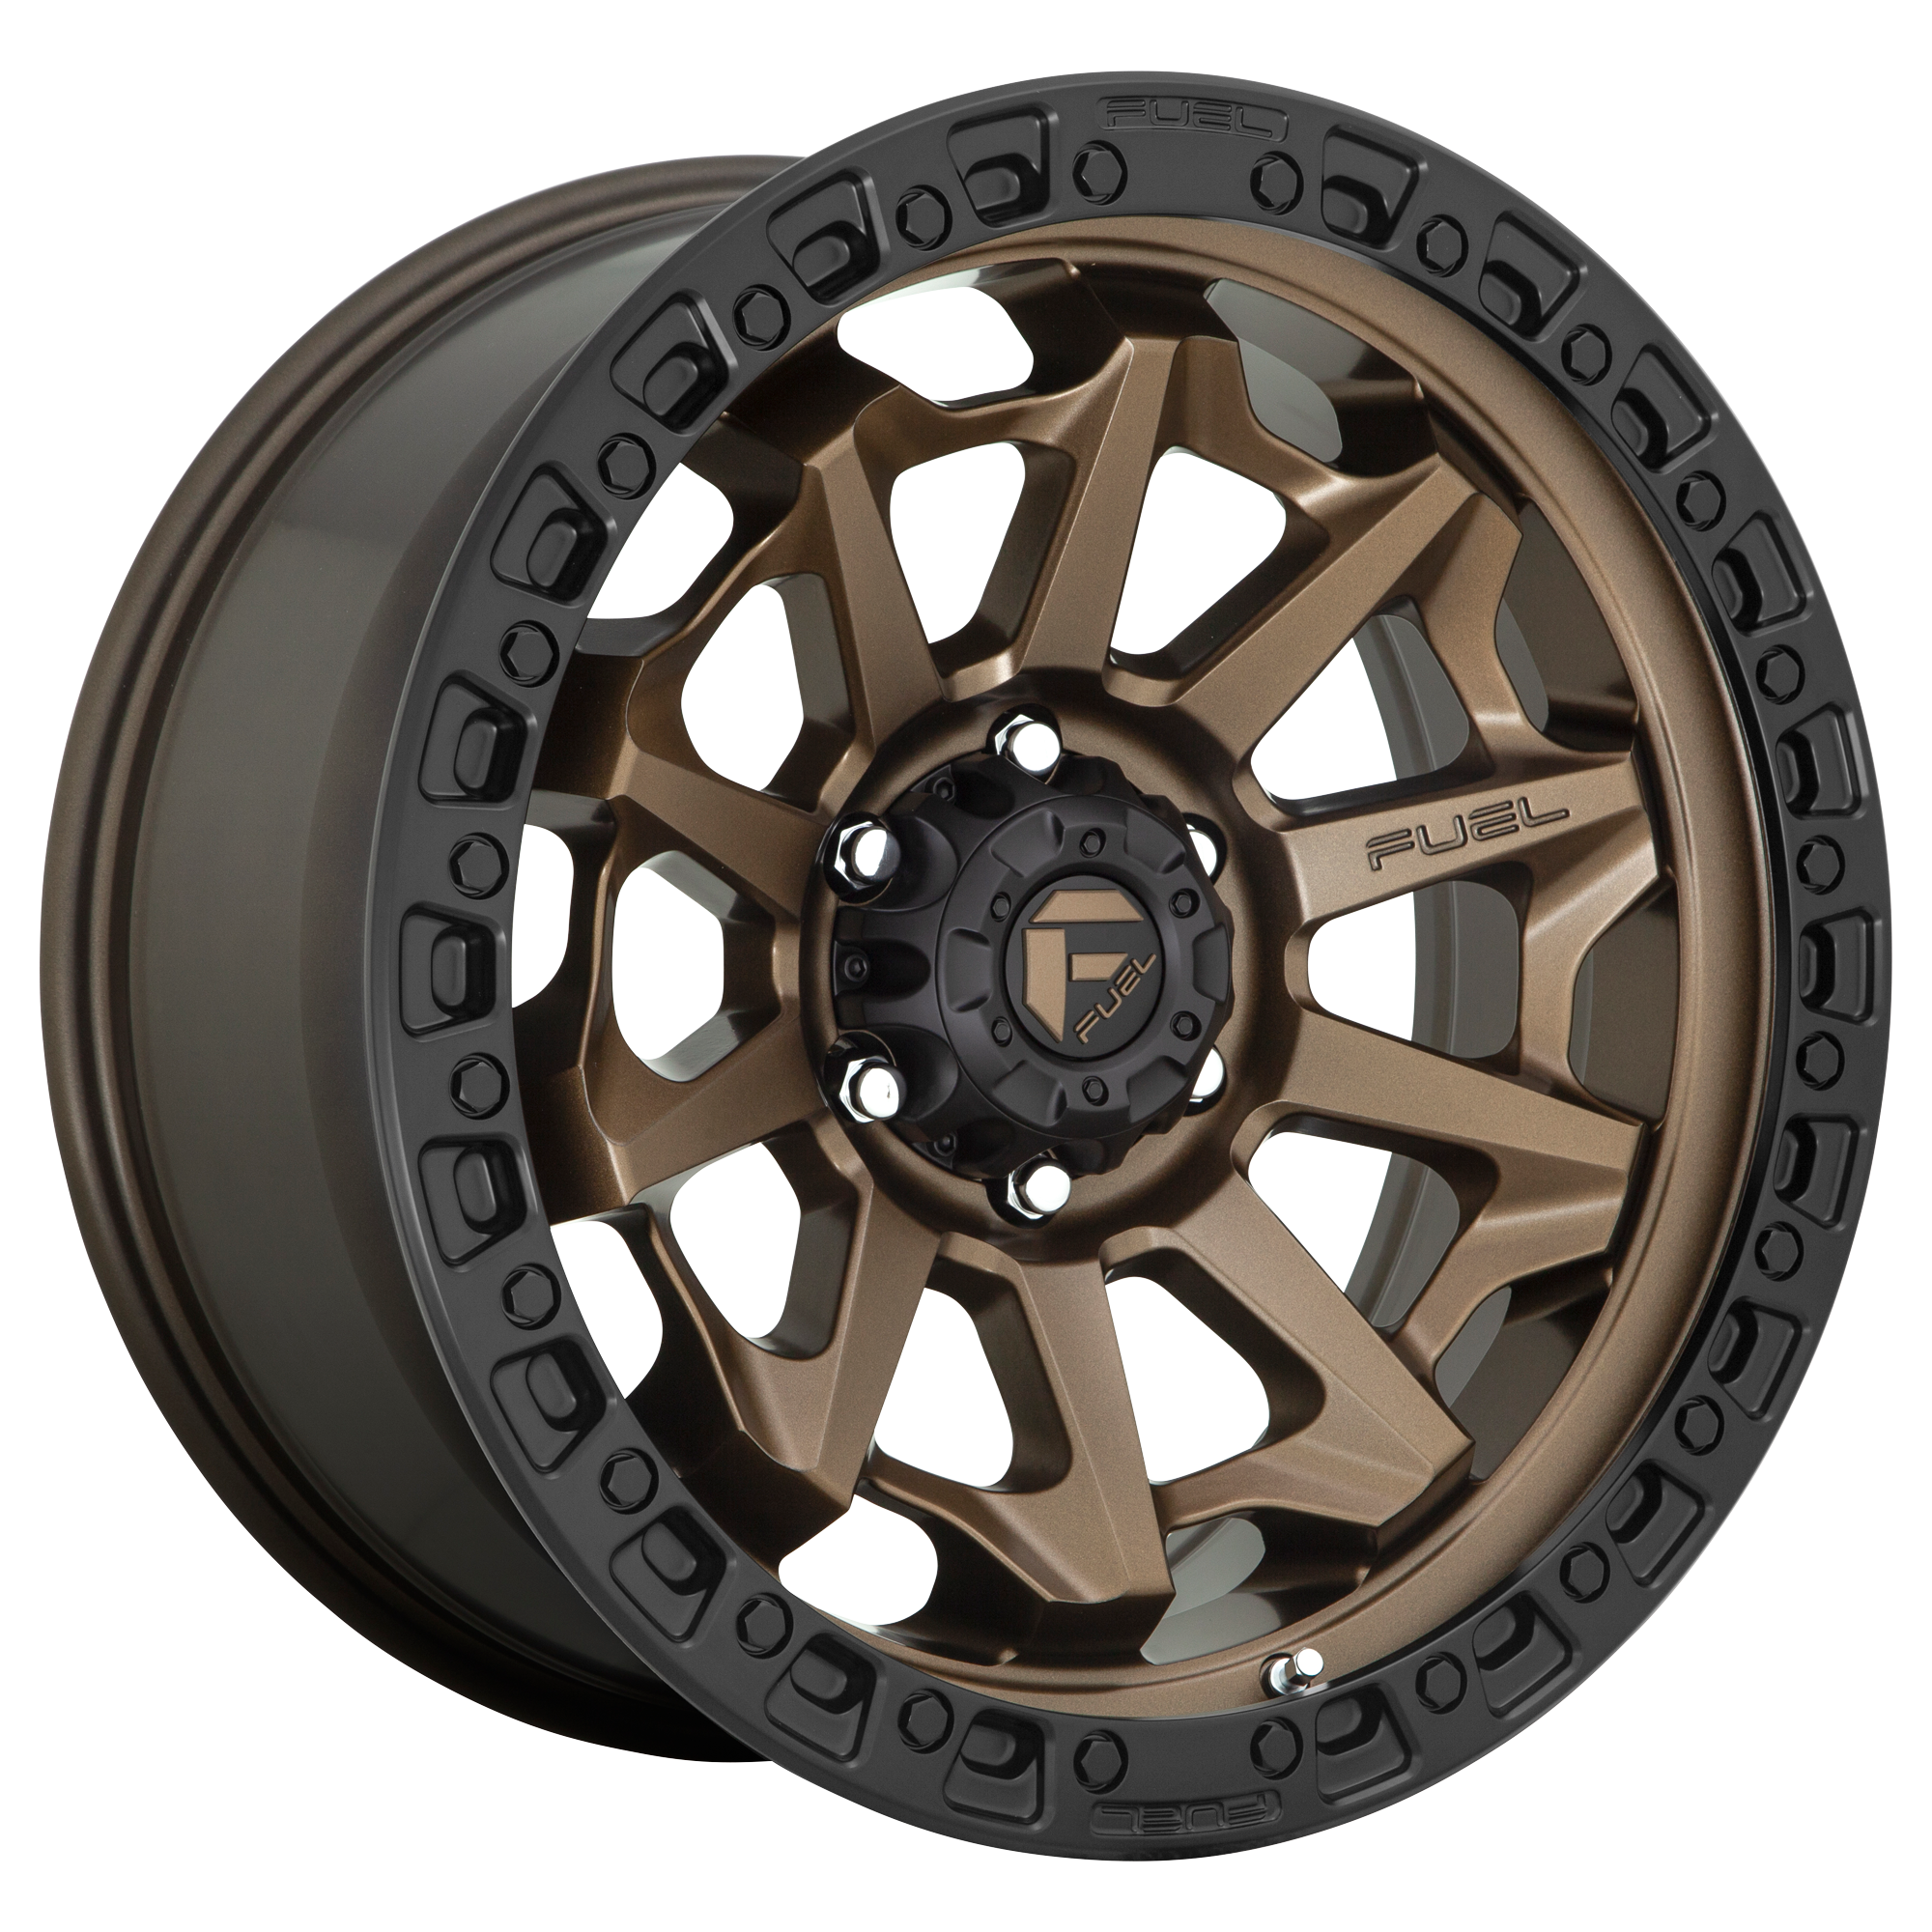 COVERT 18x9 5x127.00 MATTE BRONZE BLACK BEAD RING (1 mm) - Tires and Engine Performance